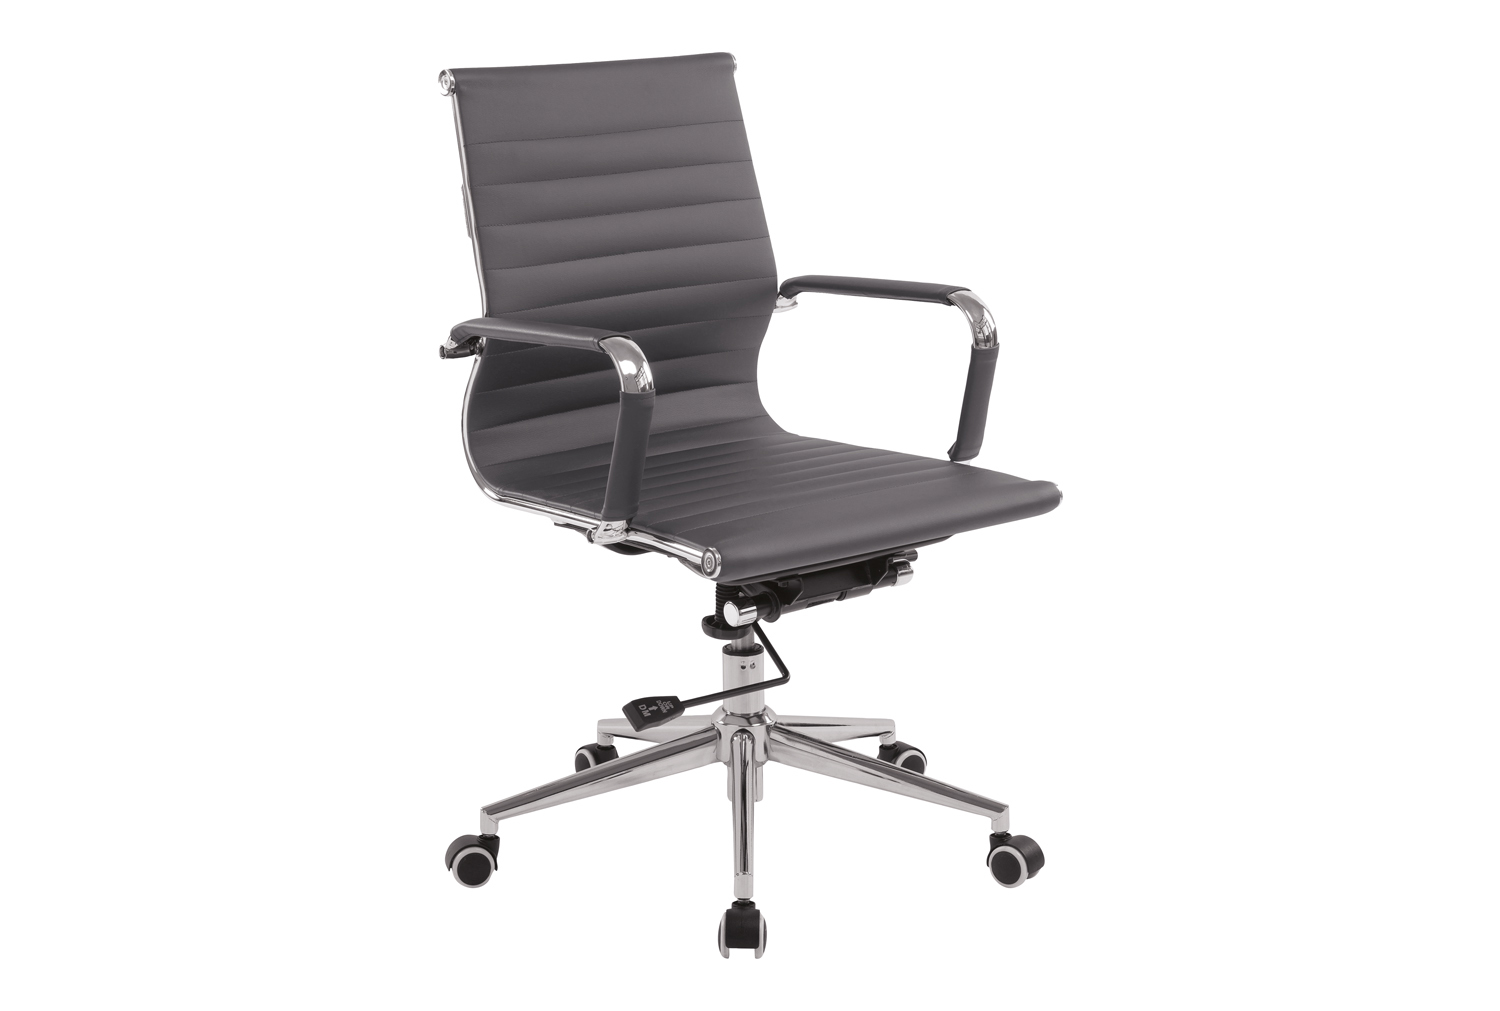 Andruzzi Medium Back Bonded Leather Executive Office Chair (Grey), Grey, Fully Installed